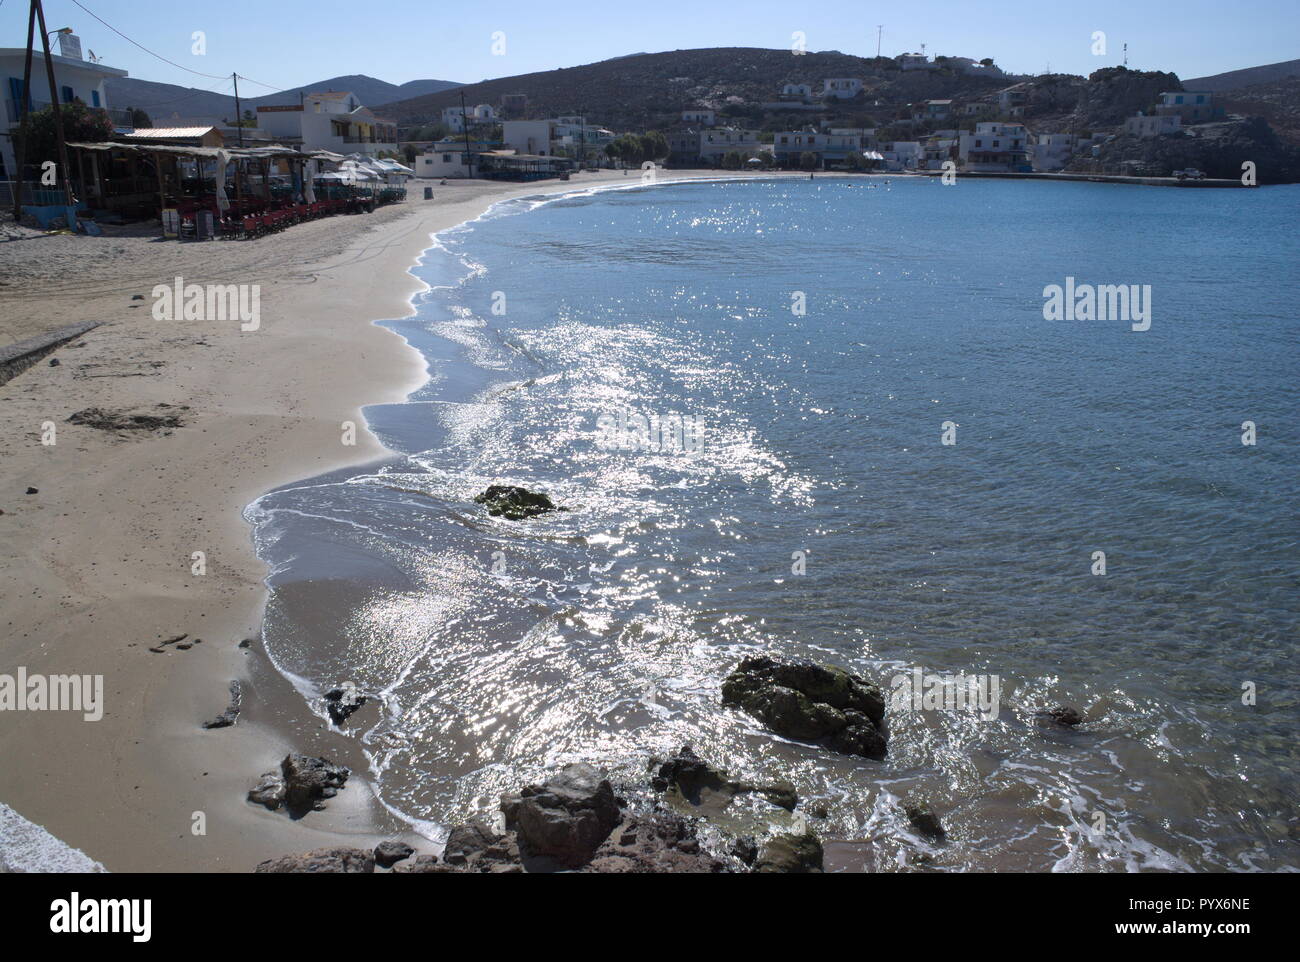 The fine sand beach at the beautiful, small, Greek island of Pserimos.  The sun glints on the tranquil waters of the bay.  Copy space. Stock Photo